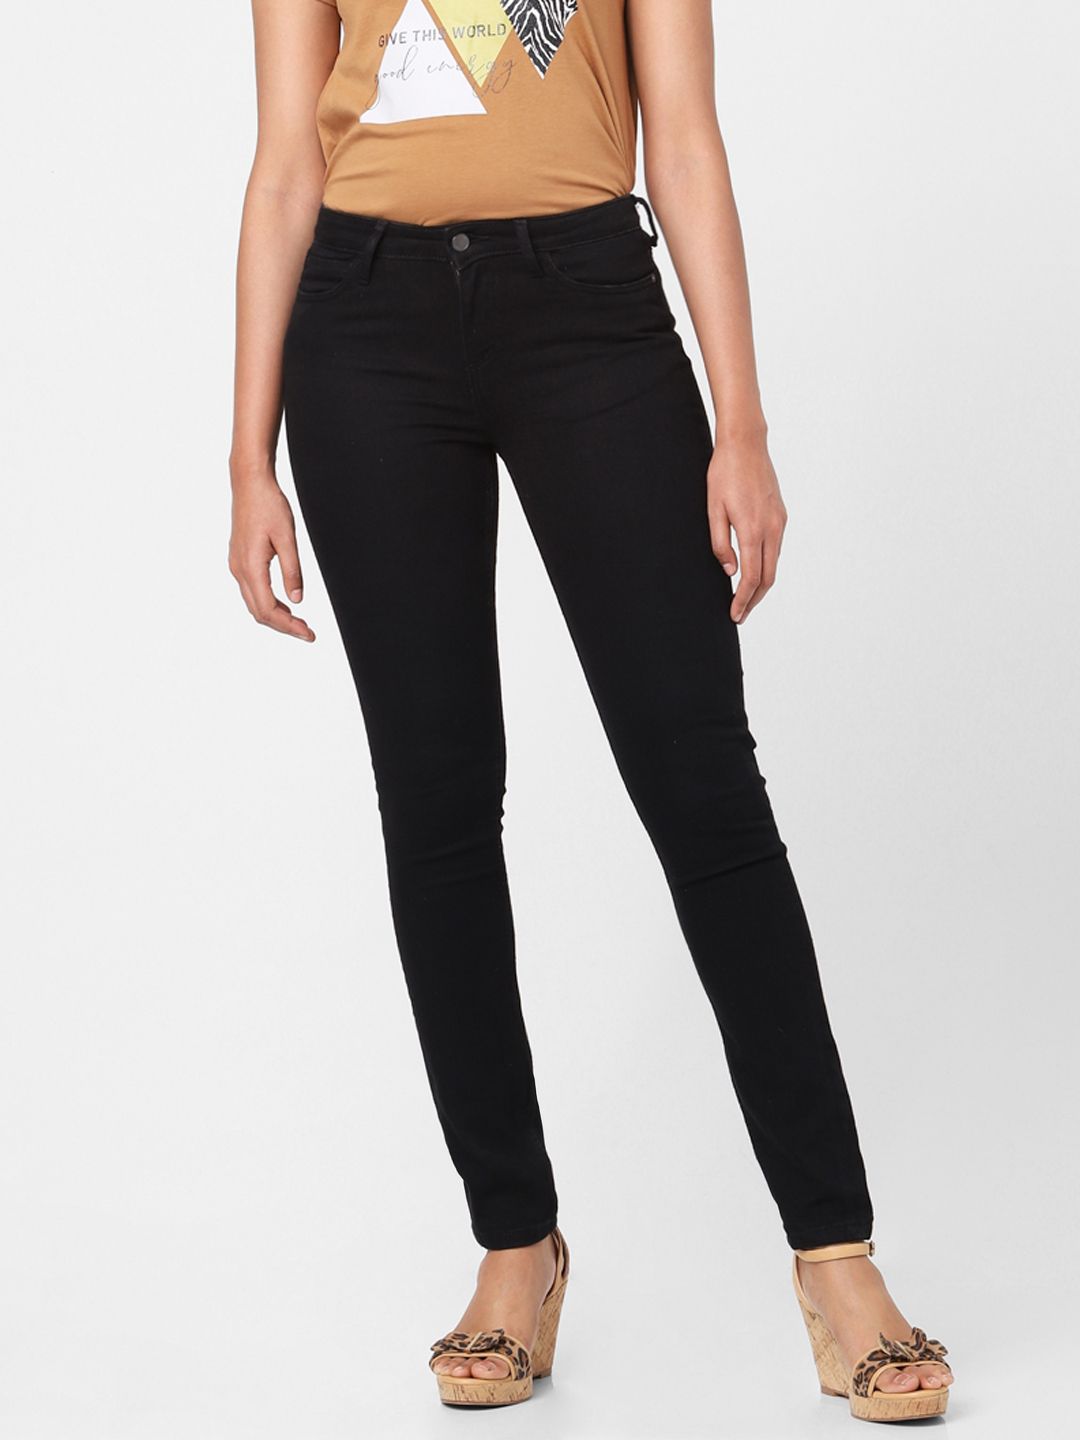 Vero Moda Women Black Skinny Fit Mid-Rise Stretchable Jeans Price in India